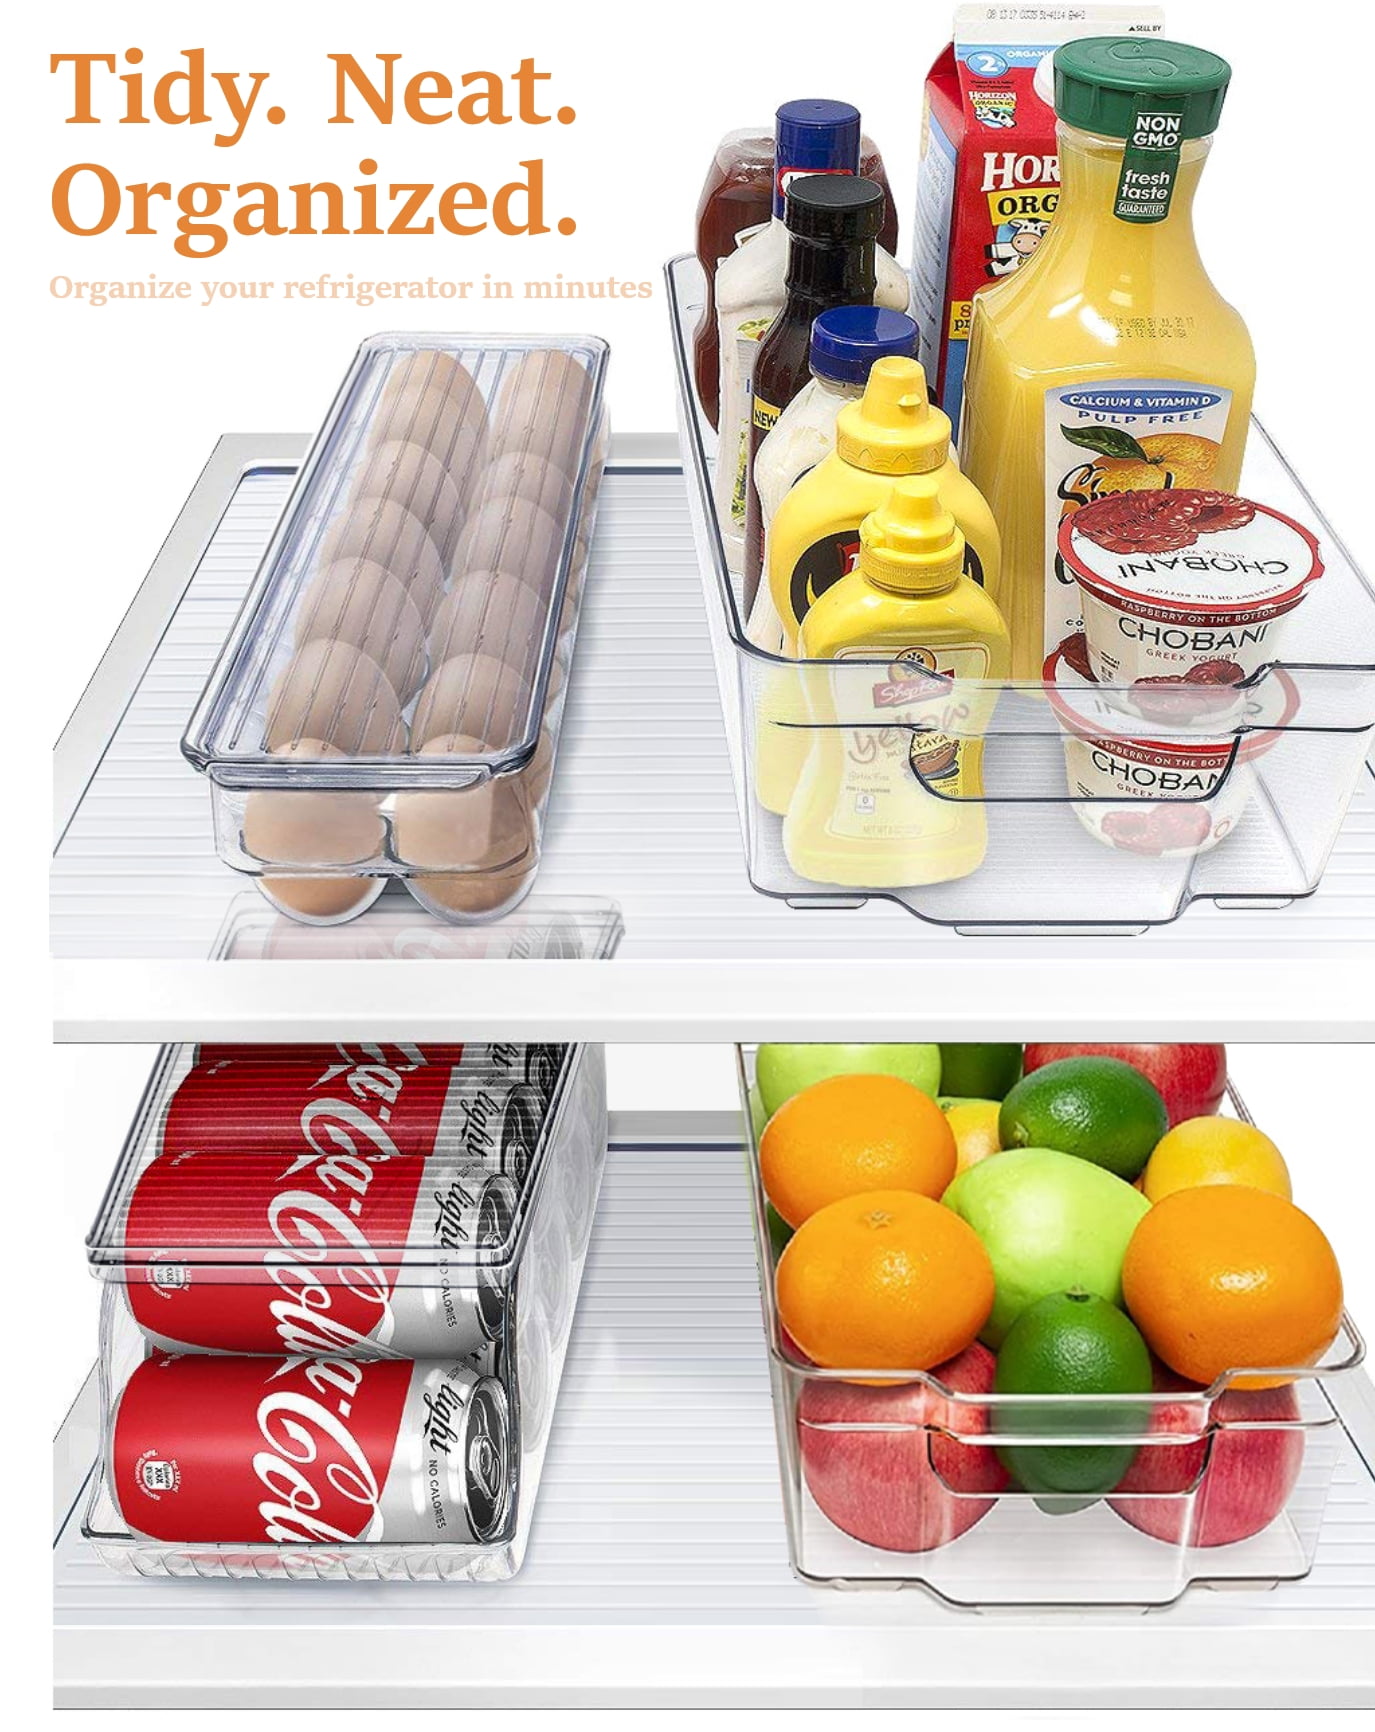  Sooyee Fridge Organizer,4 Pack Refrigerator Organizer Bins, Fridge Organizers and Storage Clear with Handle & Lid,Fruit Containers for  Fridge,Fridge Storage To Keep Fresh for Food, Vegetables,5L: Home & Kitchen